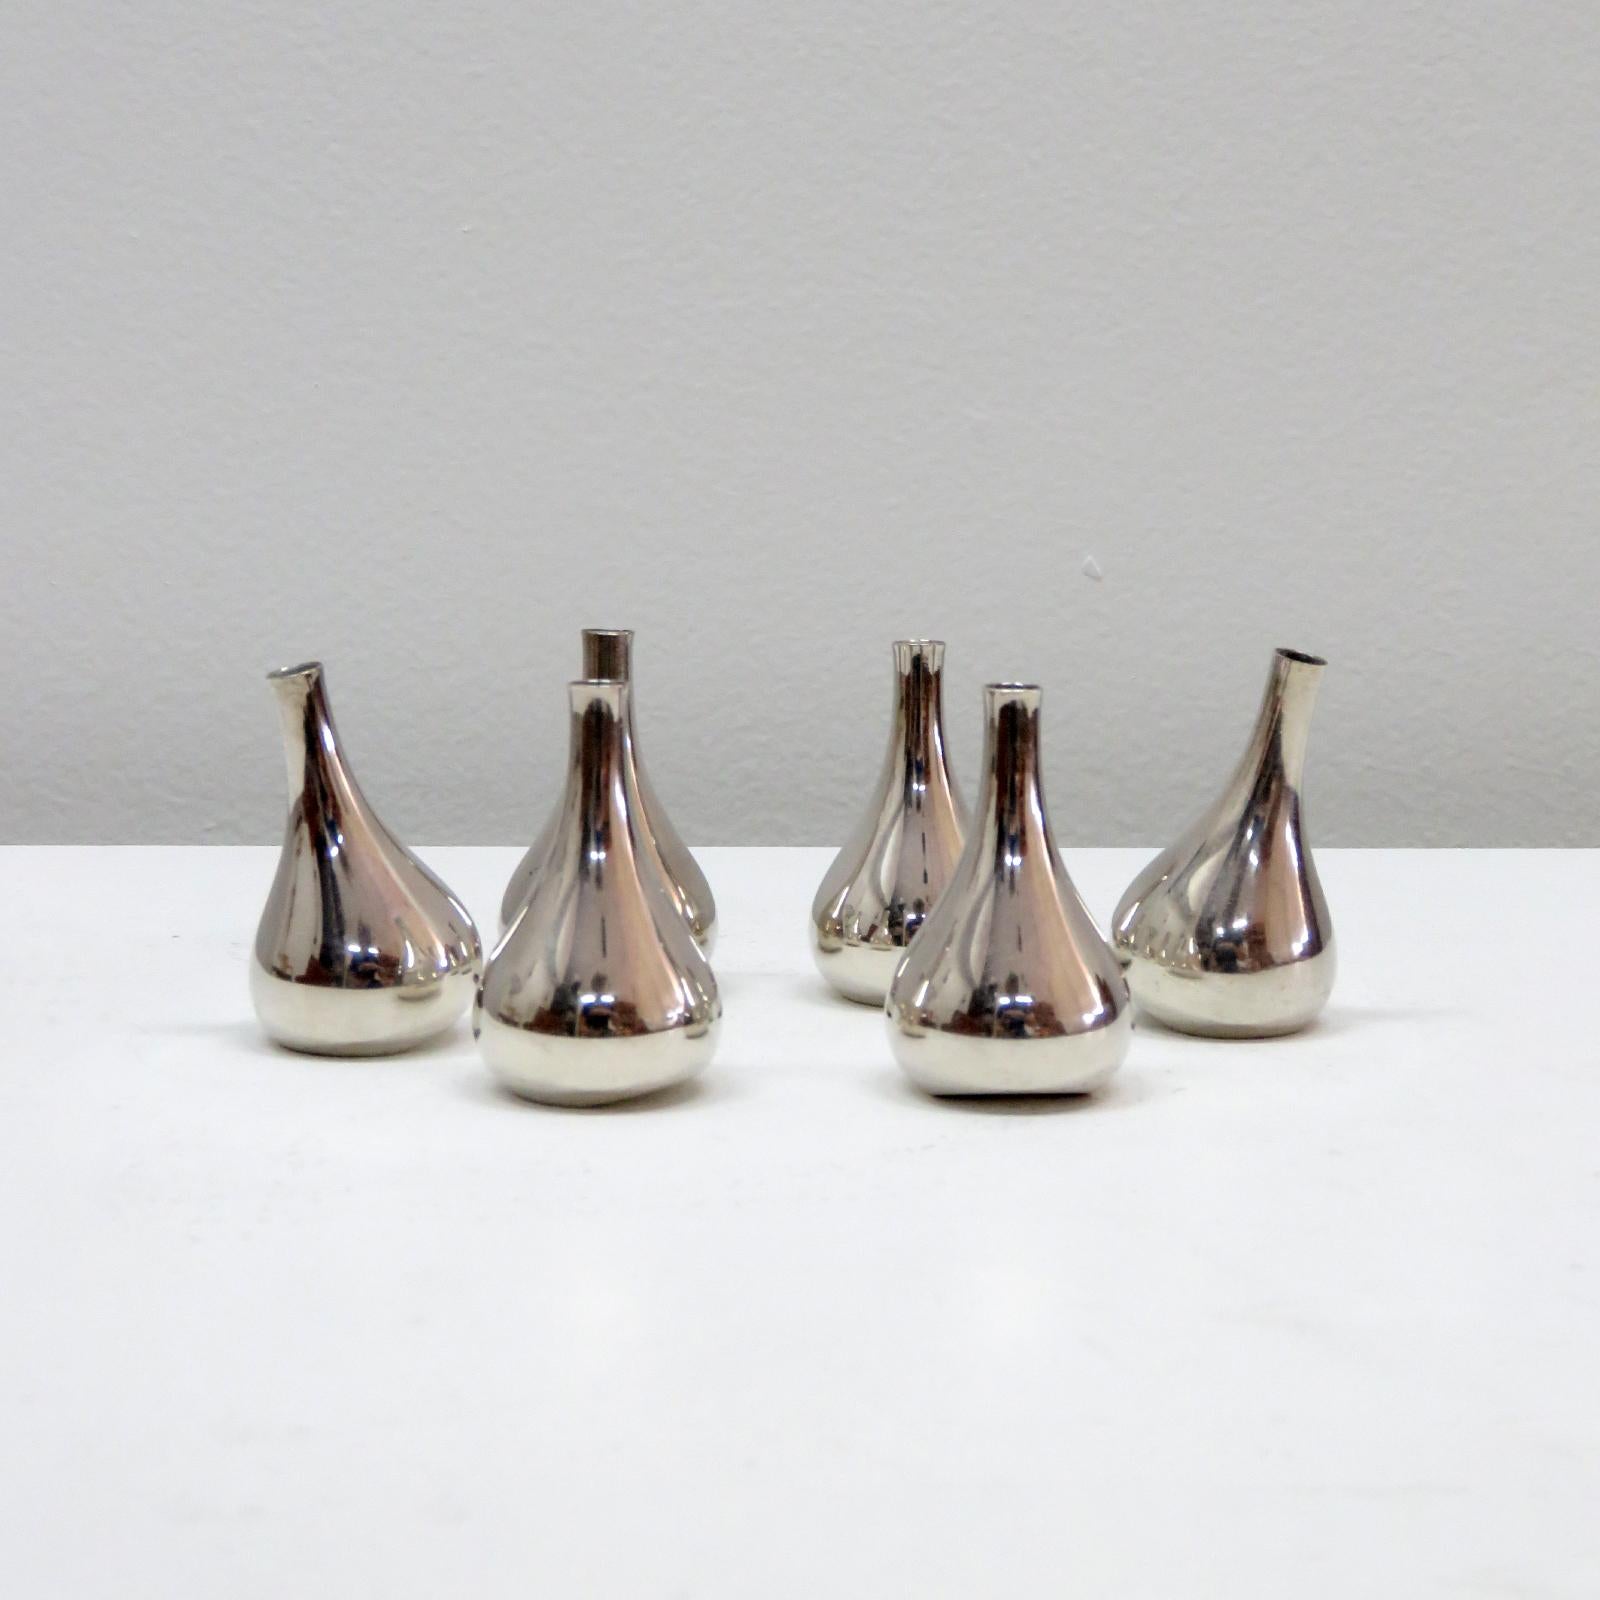 wonderful set of six tear drop candleholders by Jens Quistgaard for Dansk, circa 1960s in silver plated metal. Ideal for 1/4